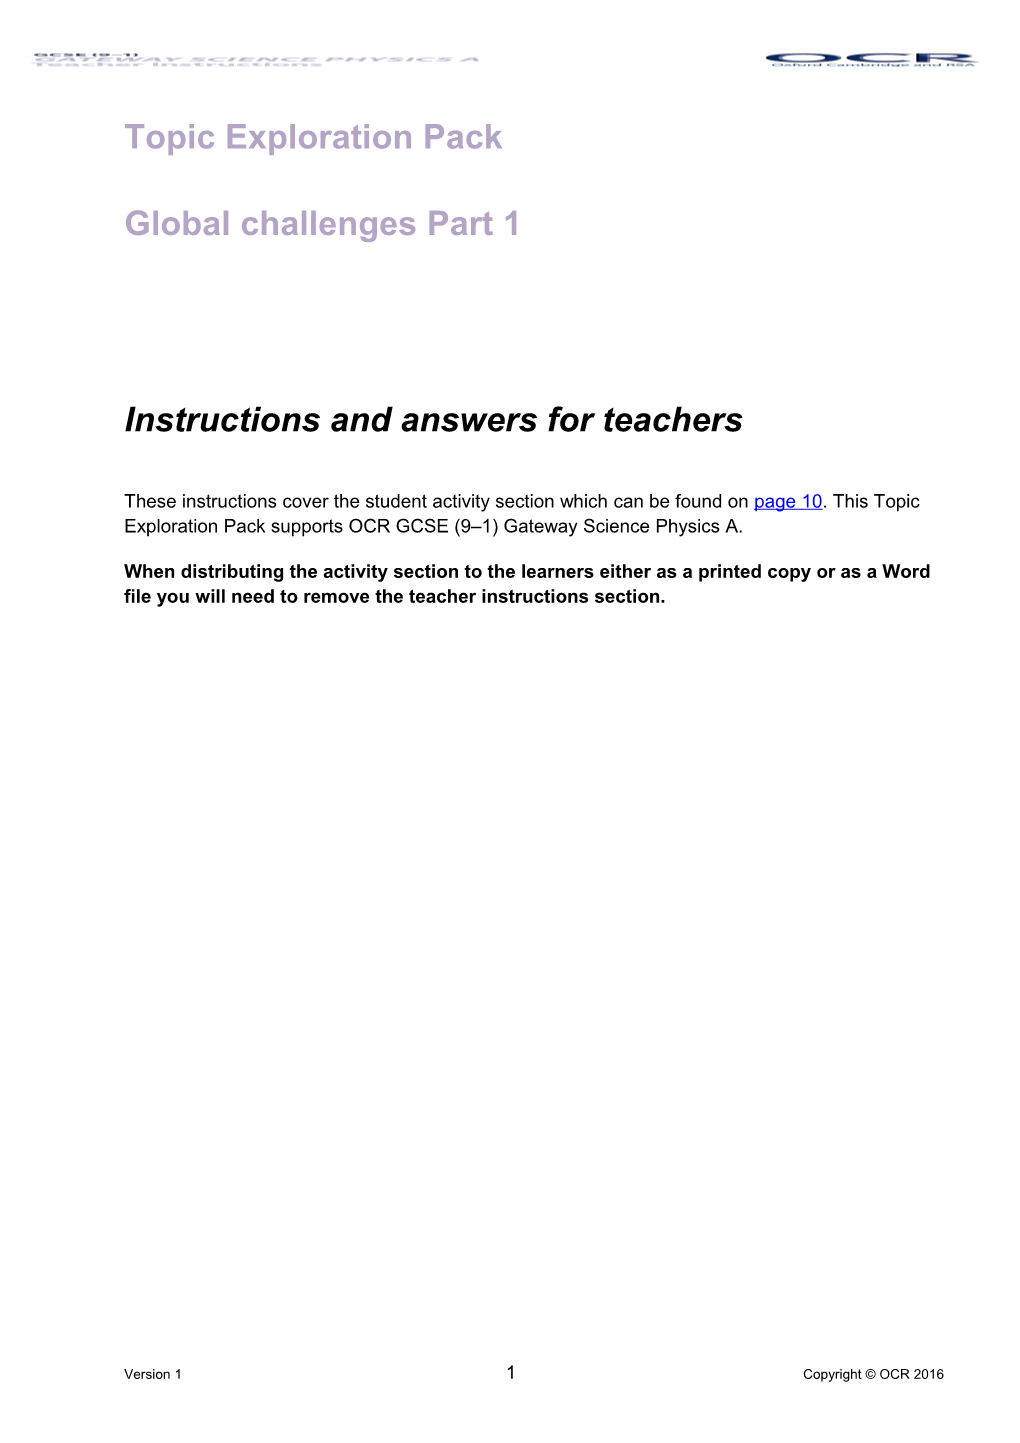 OCR GCSE (9-1) Physics a (Gateway Science)Topic Exploration Pack - Global Challenges Part 1